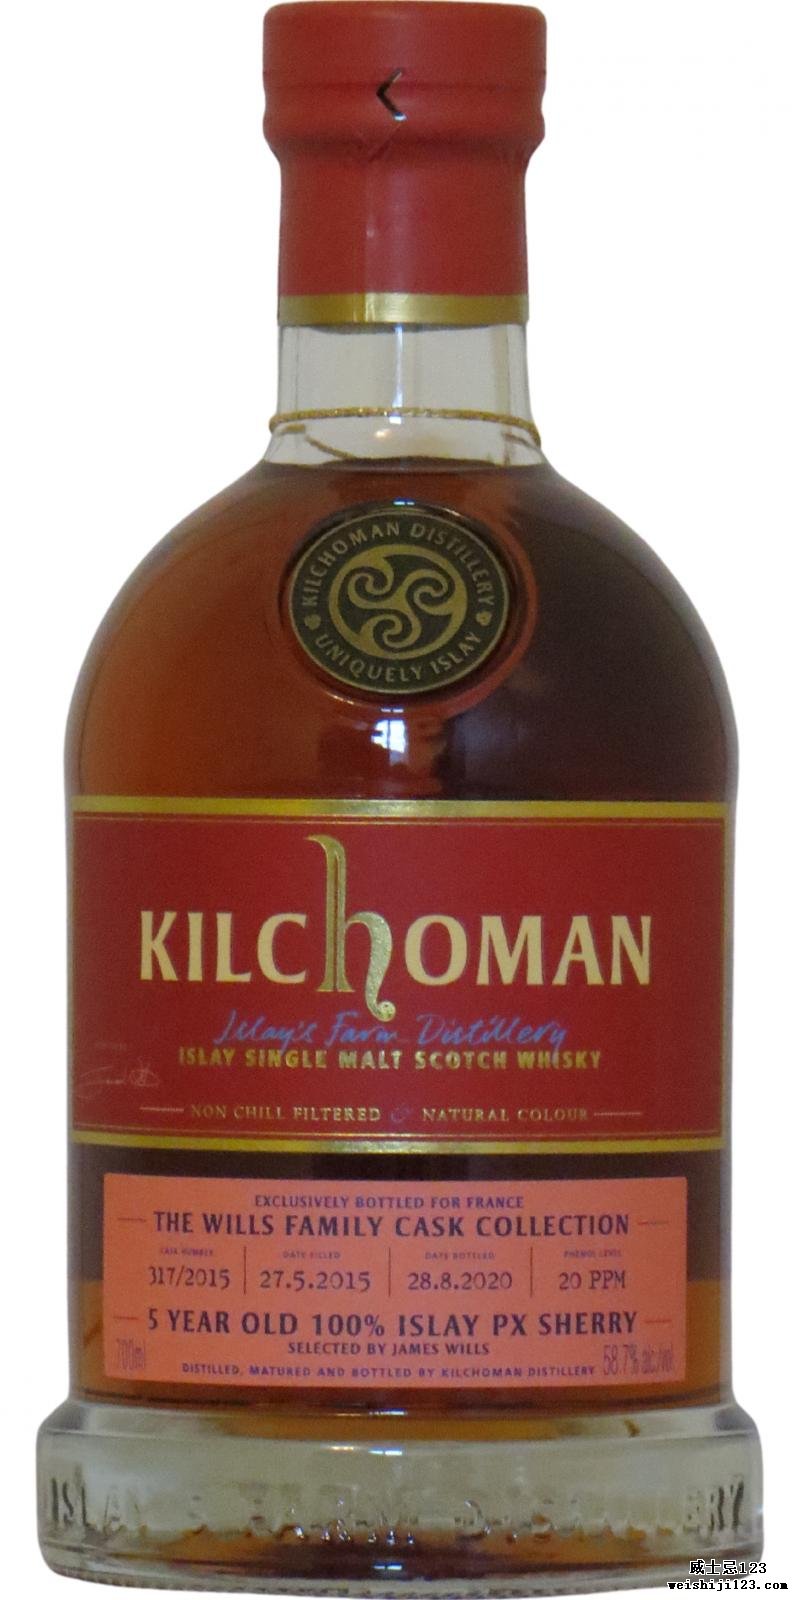 Kilchoman The Wills Family Cask Collection - James Wills